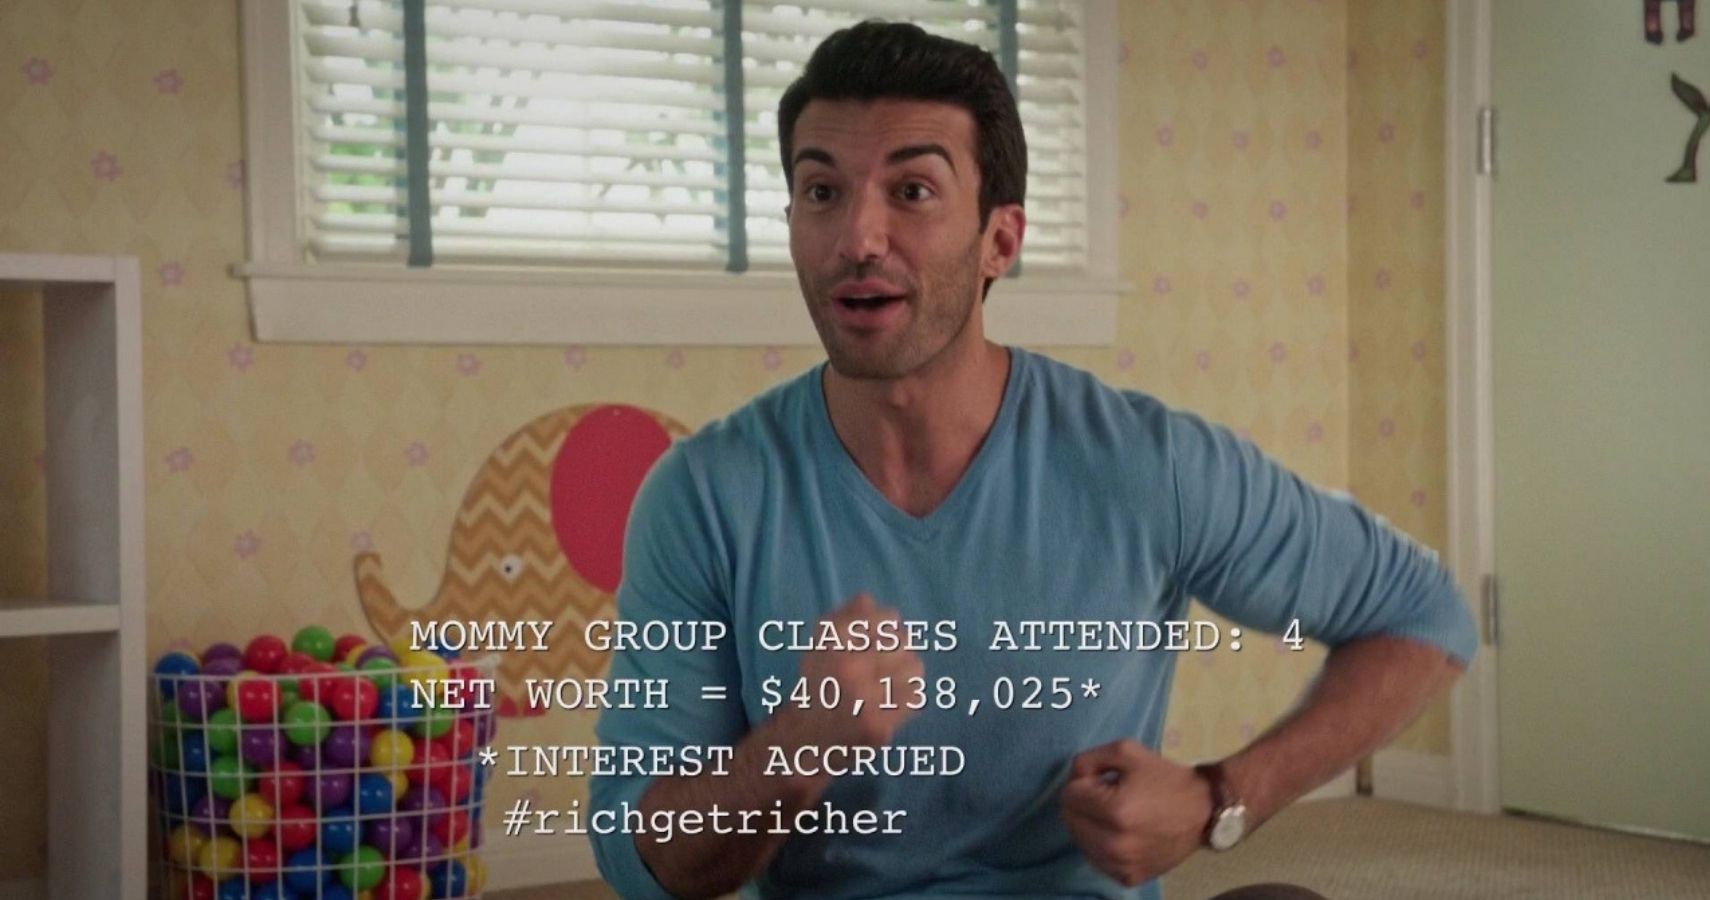 Jane the Virgin: narrator commentary about Rafael